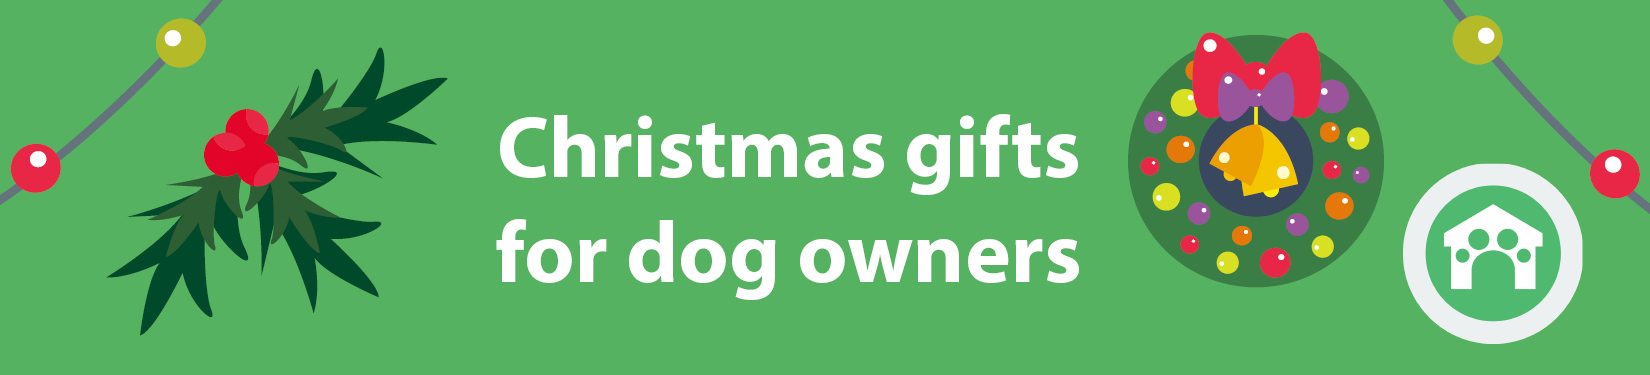 Christmas gifts for dog owners header image